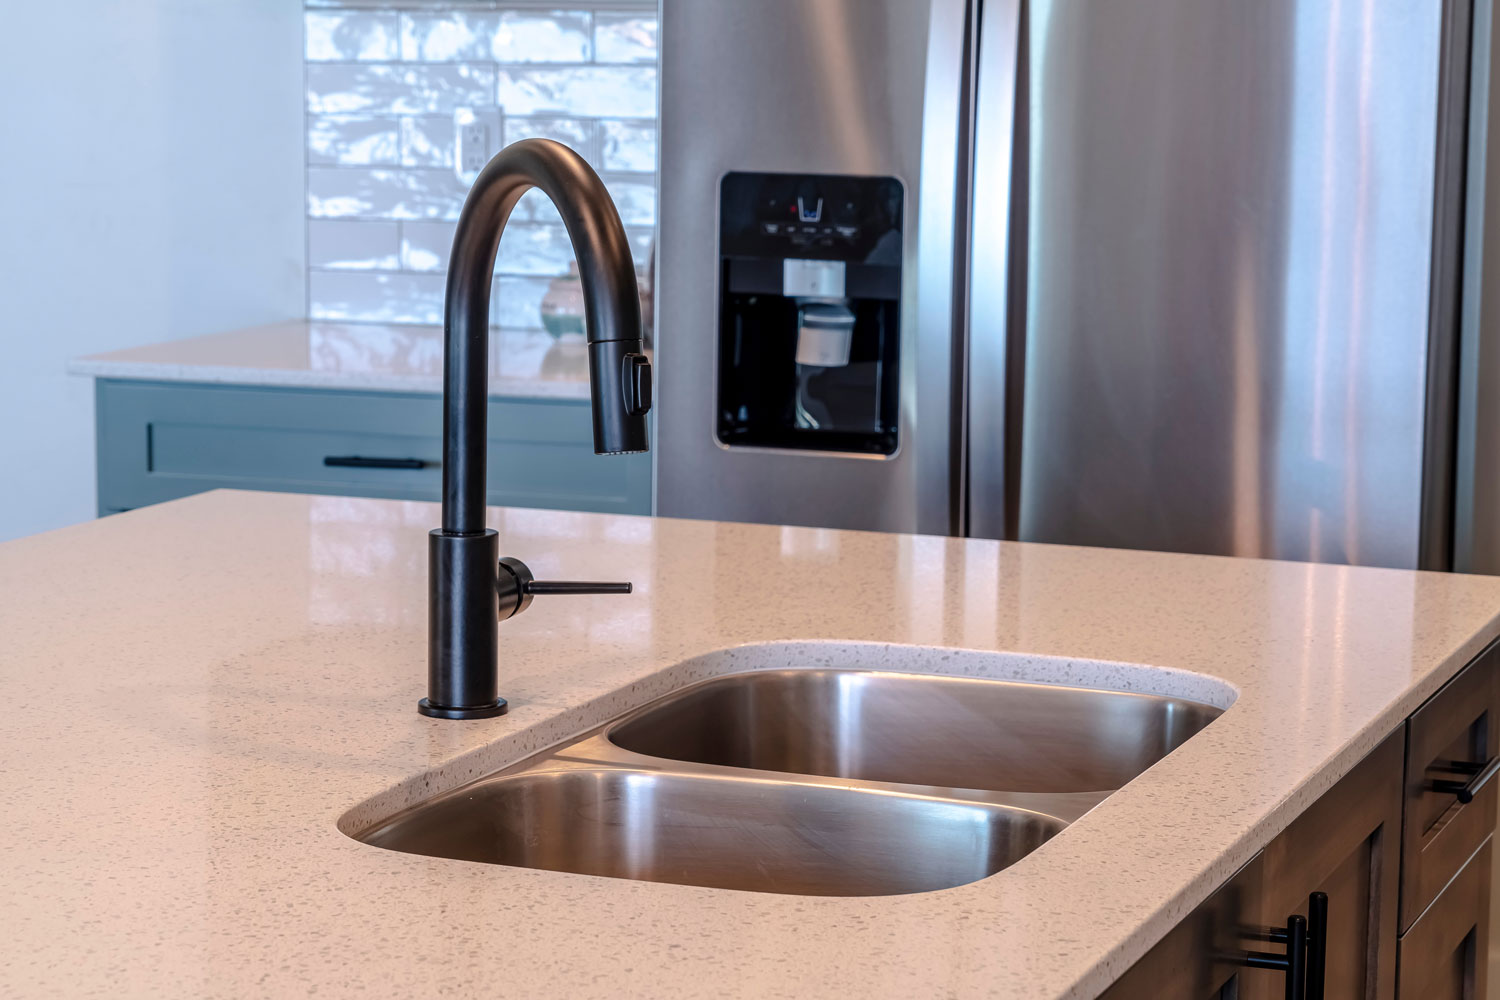 A powder coat black faucet matched with stainless steel sink